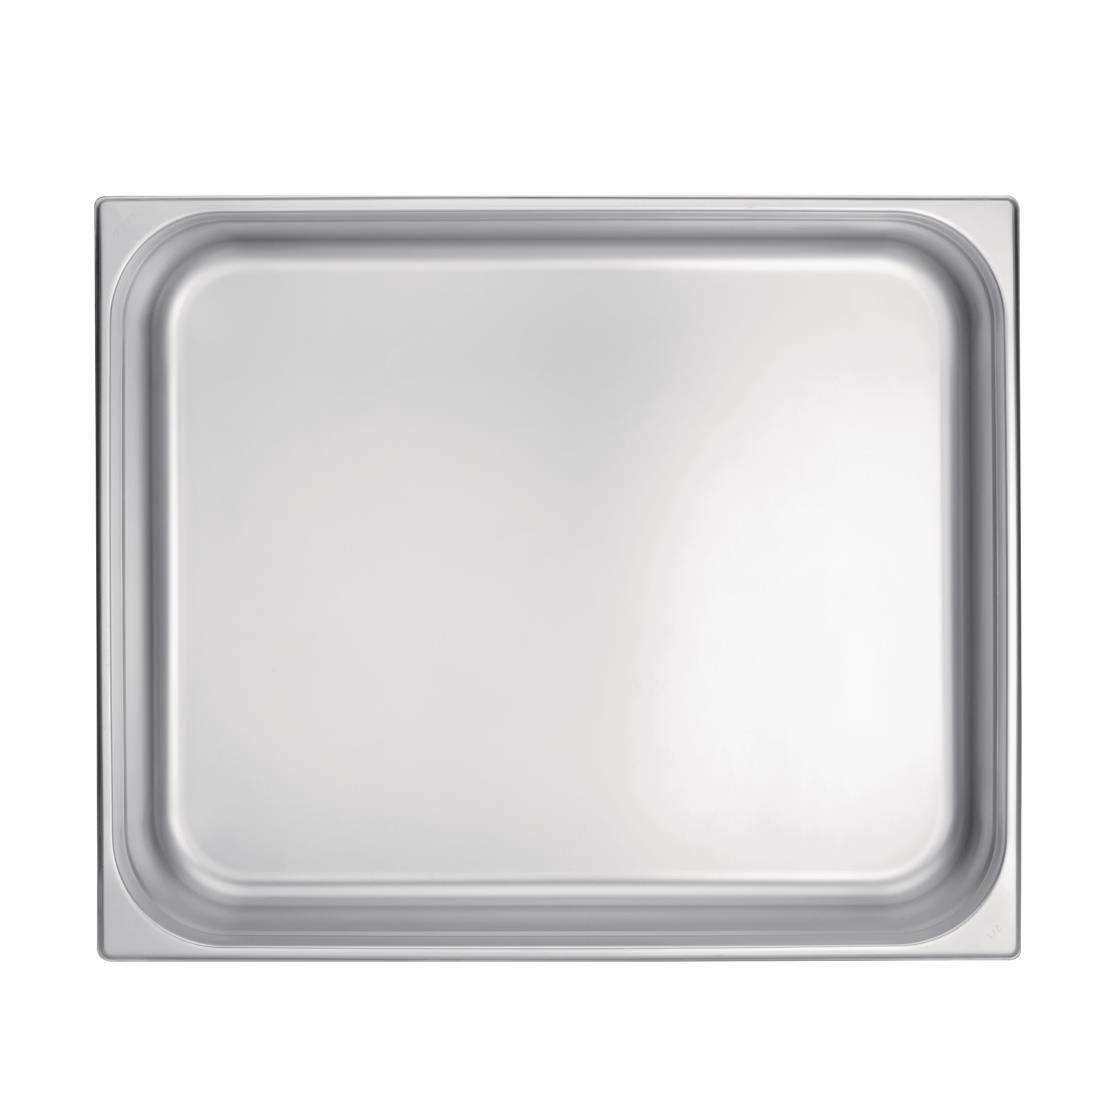 Vogue Stainless Steel 2/1 Gastronorm Pan 100mm - K804  - 4